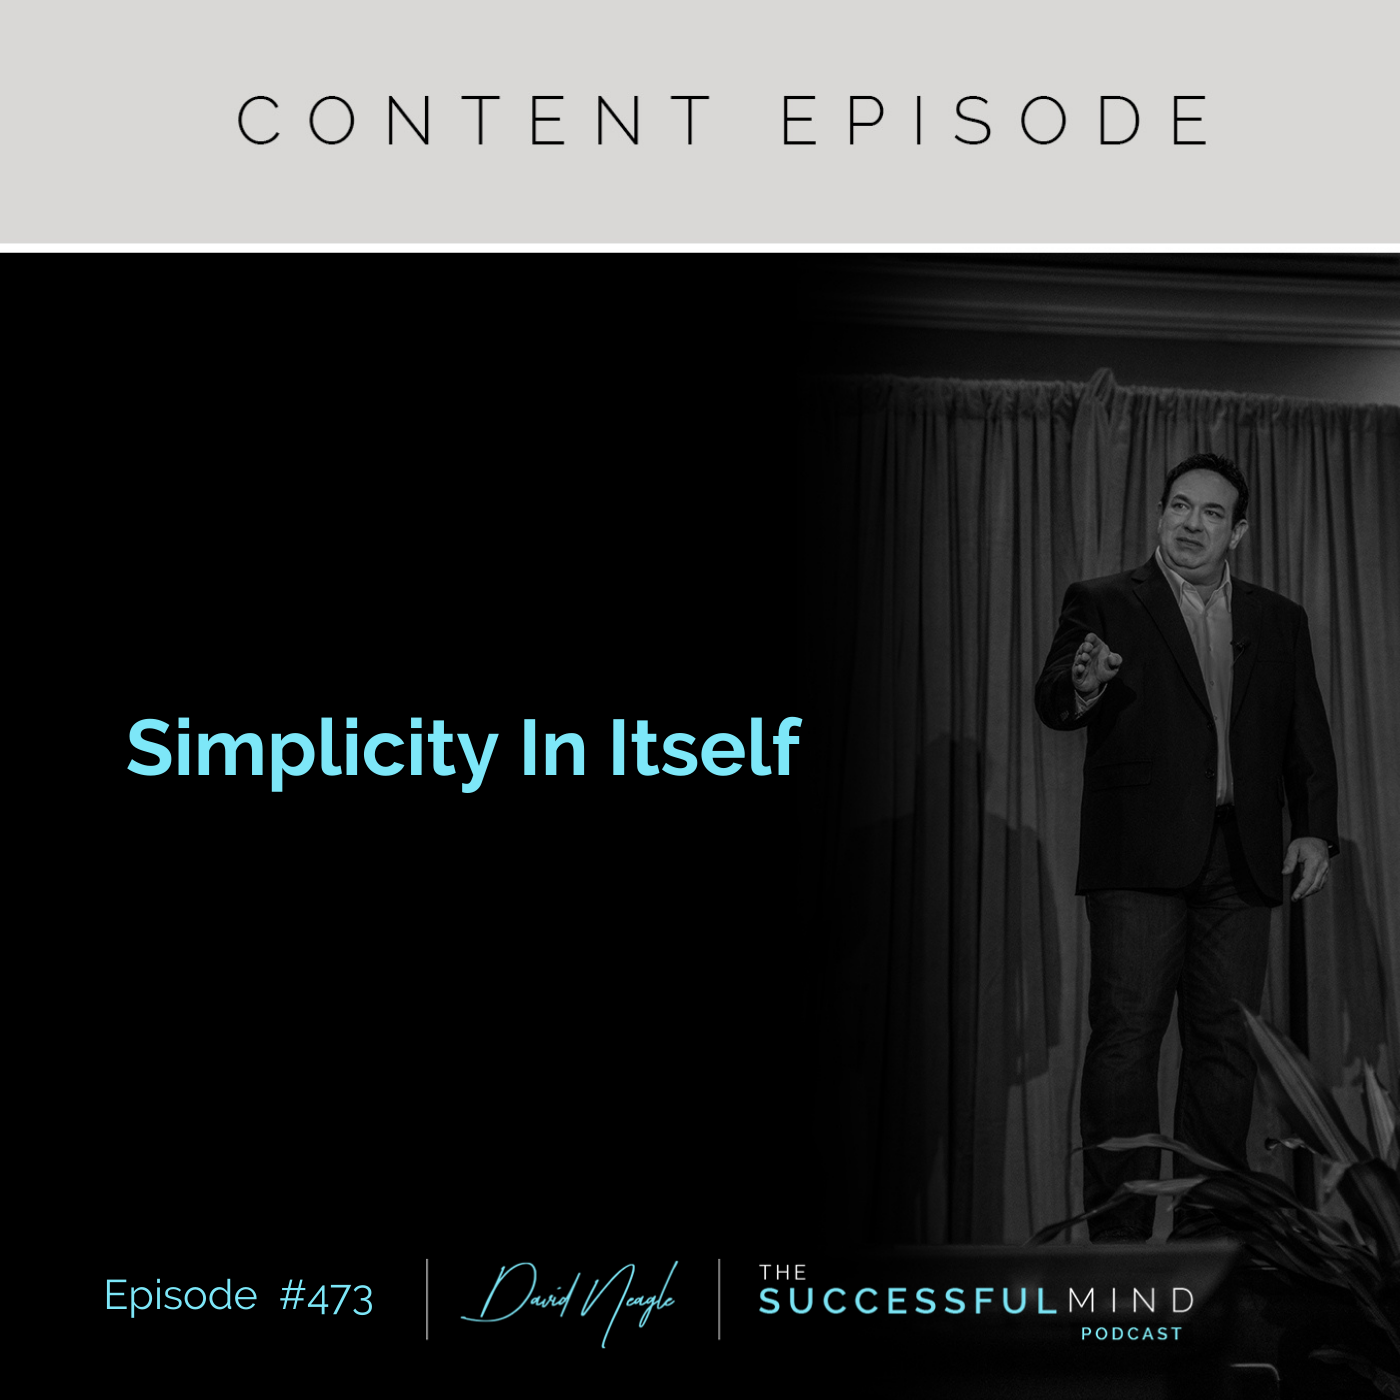 The Successful Mind Podcast - Episode 473 - Simplicity In Itself